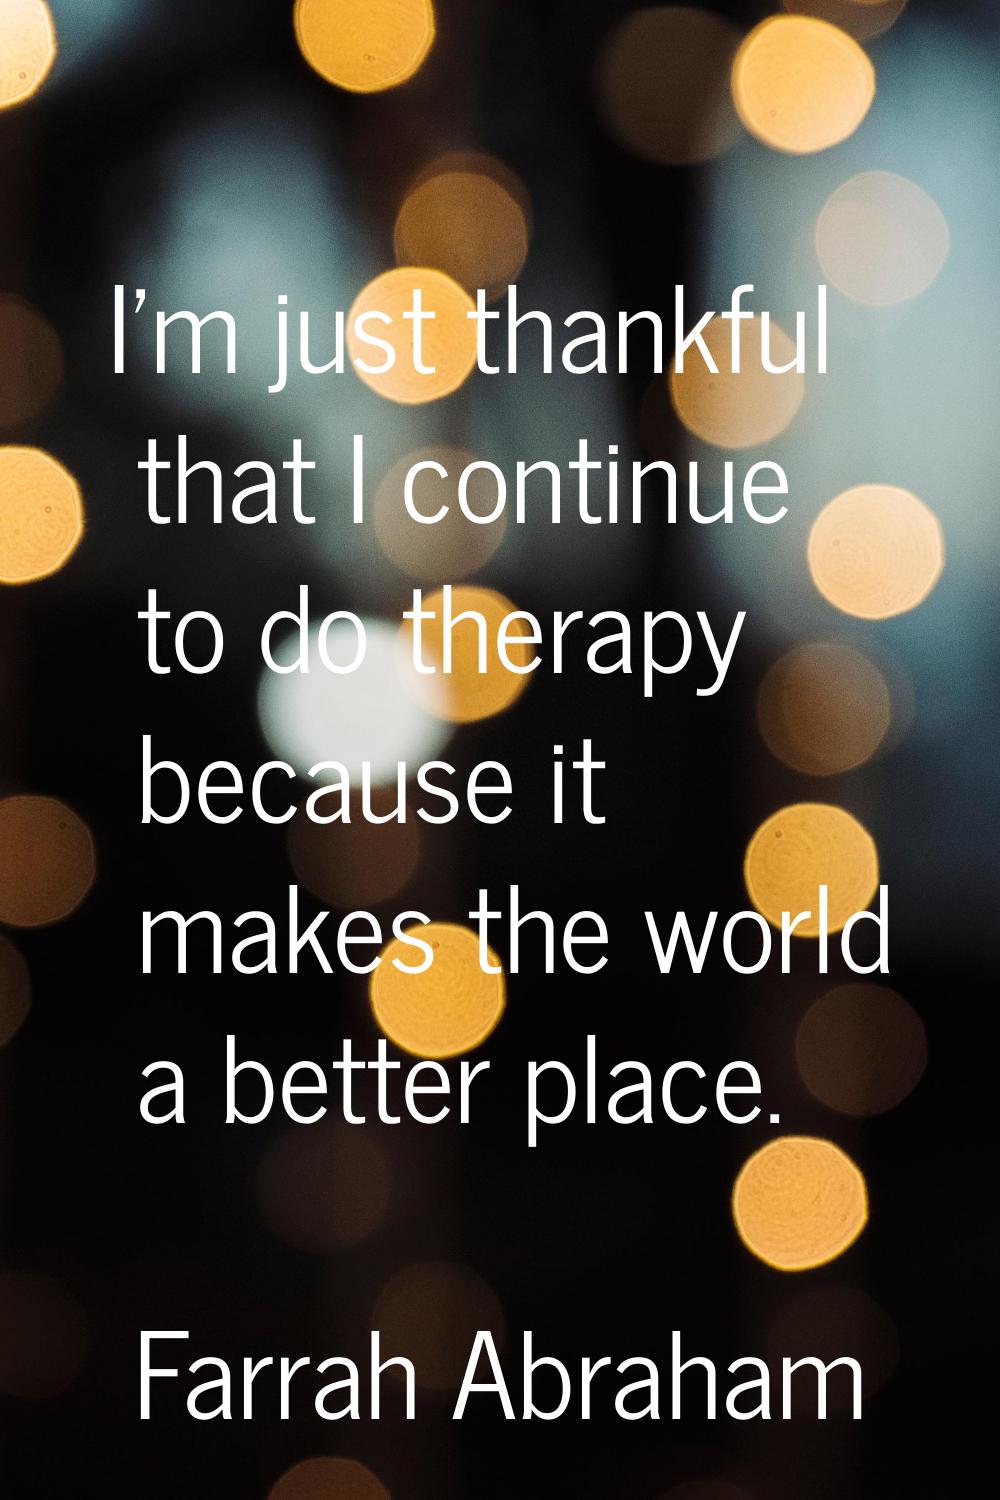 I'm just thankful that I continue to do therapy because it makes the world a better place.